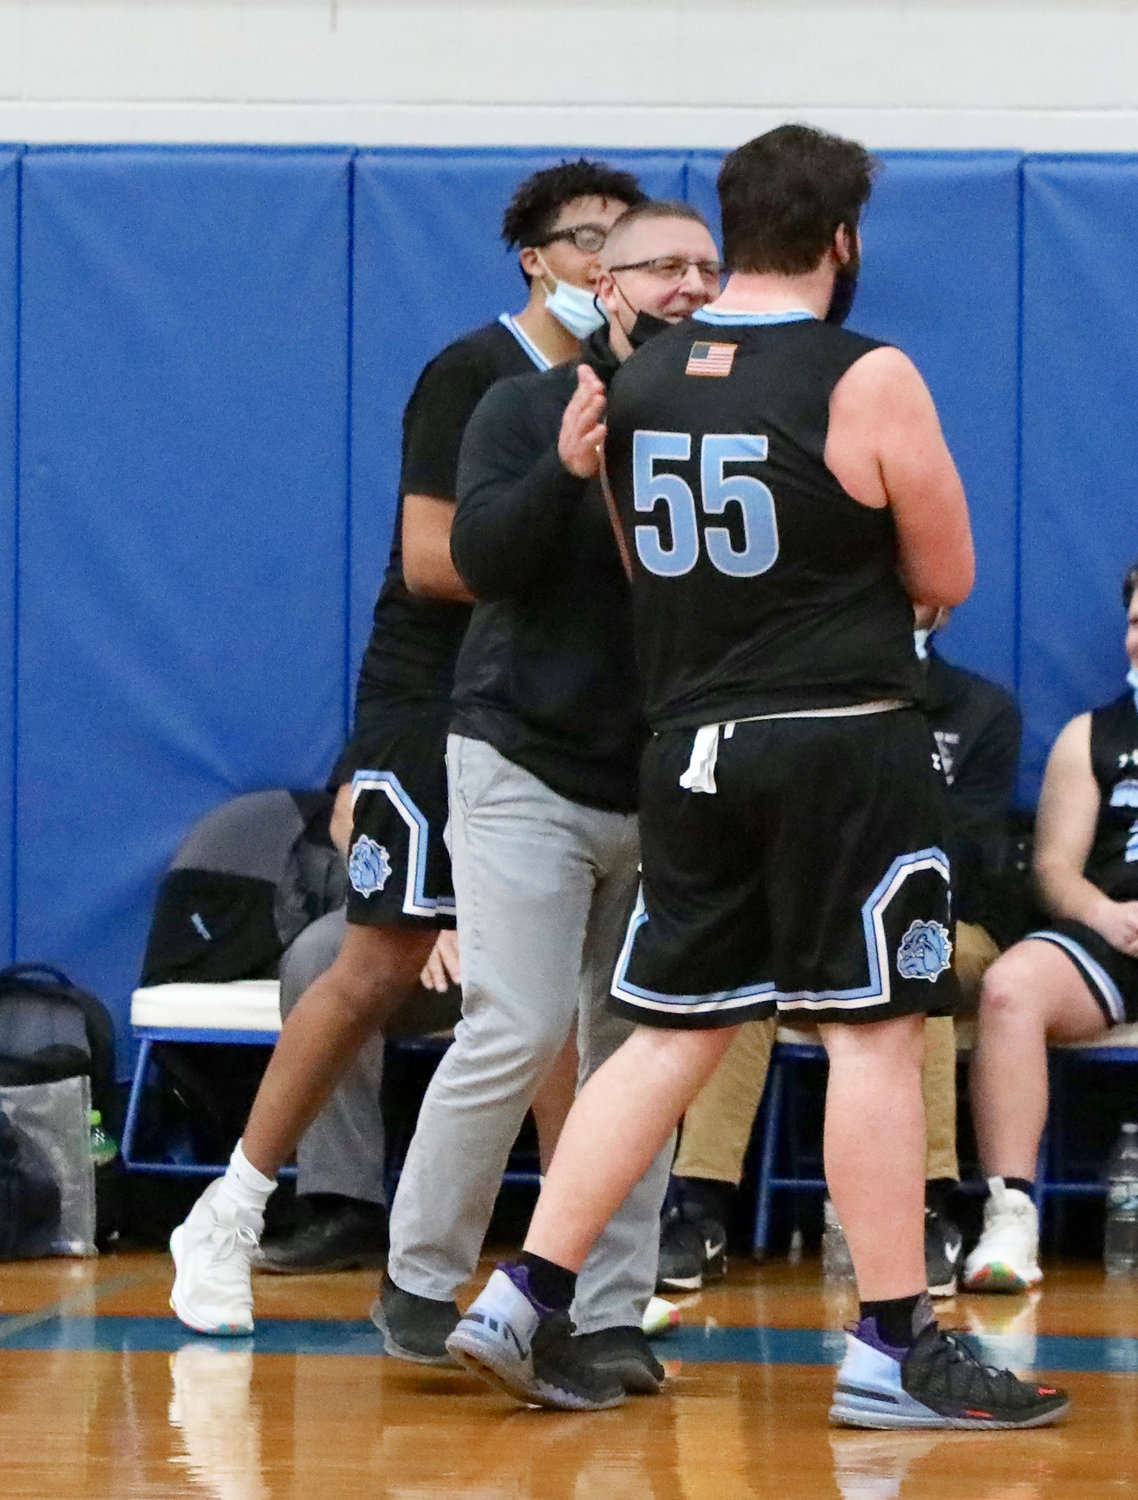 An emotional exit. Chris Campanelli leaves the game in the waning minutes and is patted on the back affectionately by coach John Meyer. The Big Fella left his imprint on SW basketball just as he did in football and will do this spring as a thrower and sometime relay runner in track.